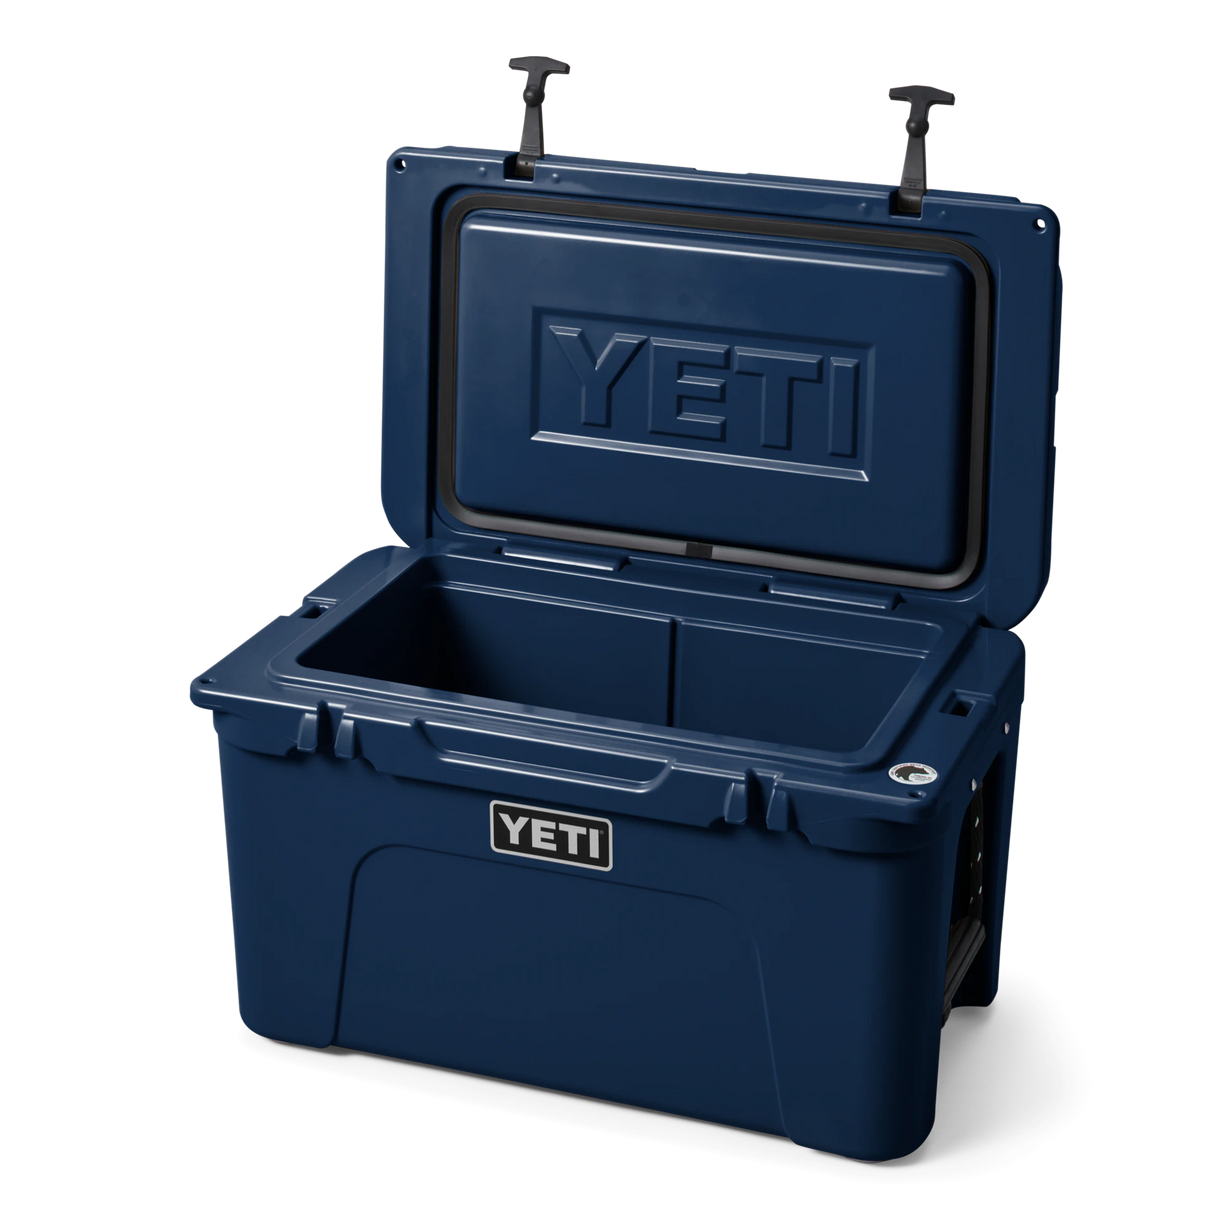 Yeti Tundra 45 Cooler Review - Outdoors with Bear Grylls